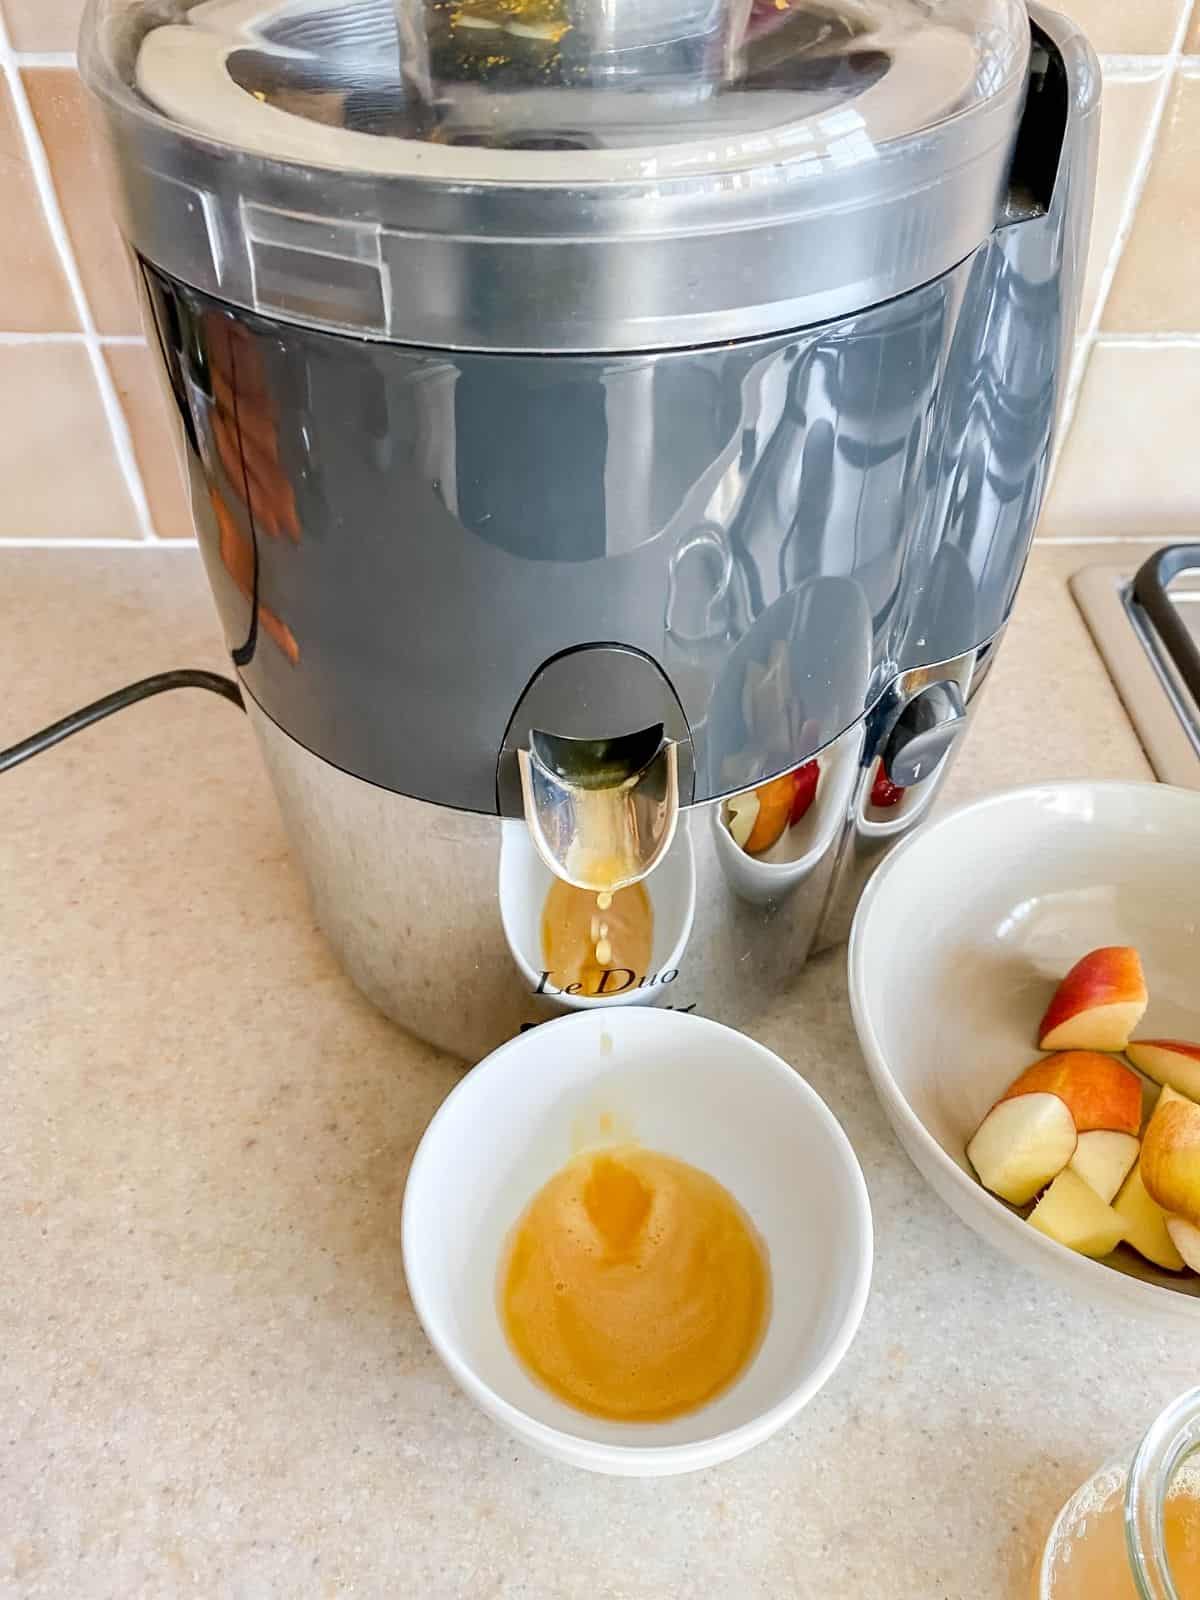 making apple ginger juice though a juicer next to a bowl of apple pieces.